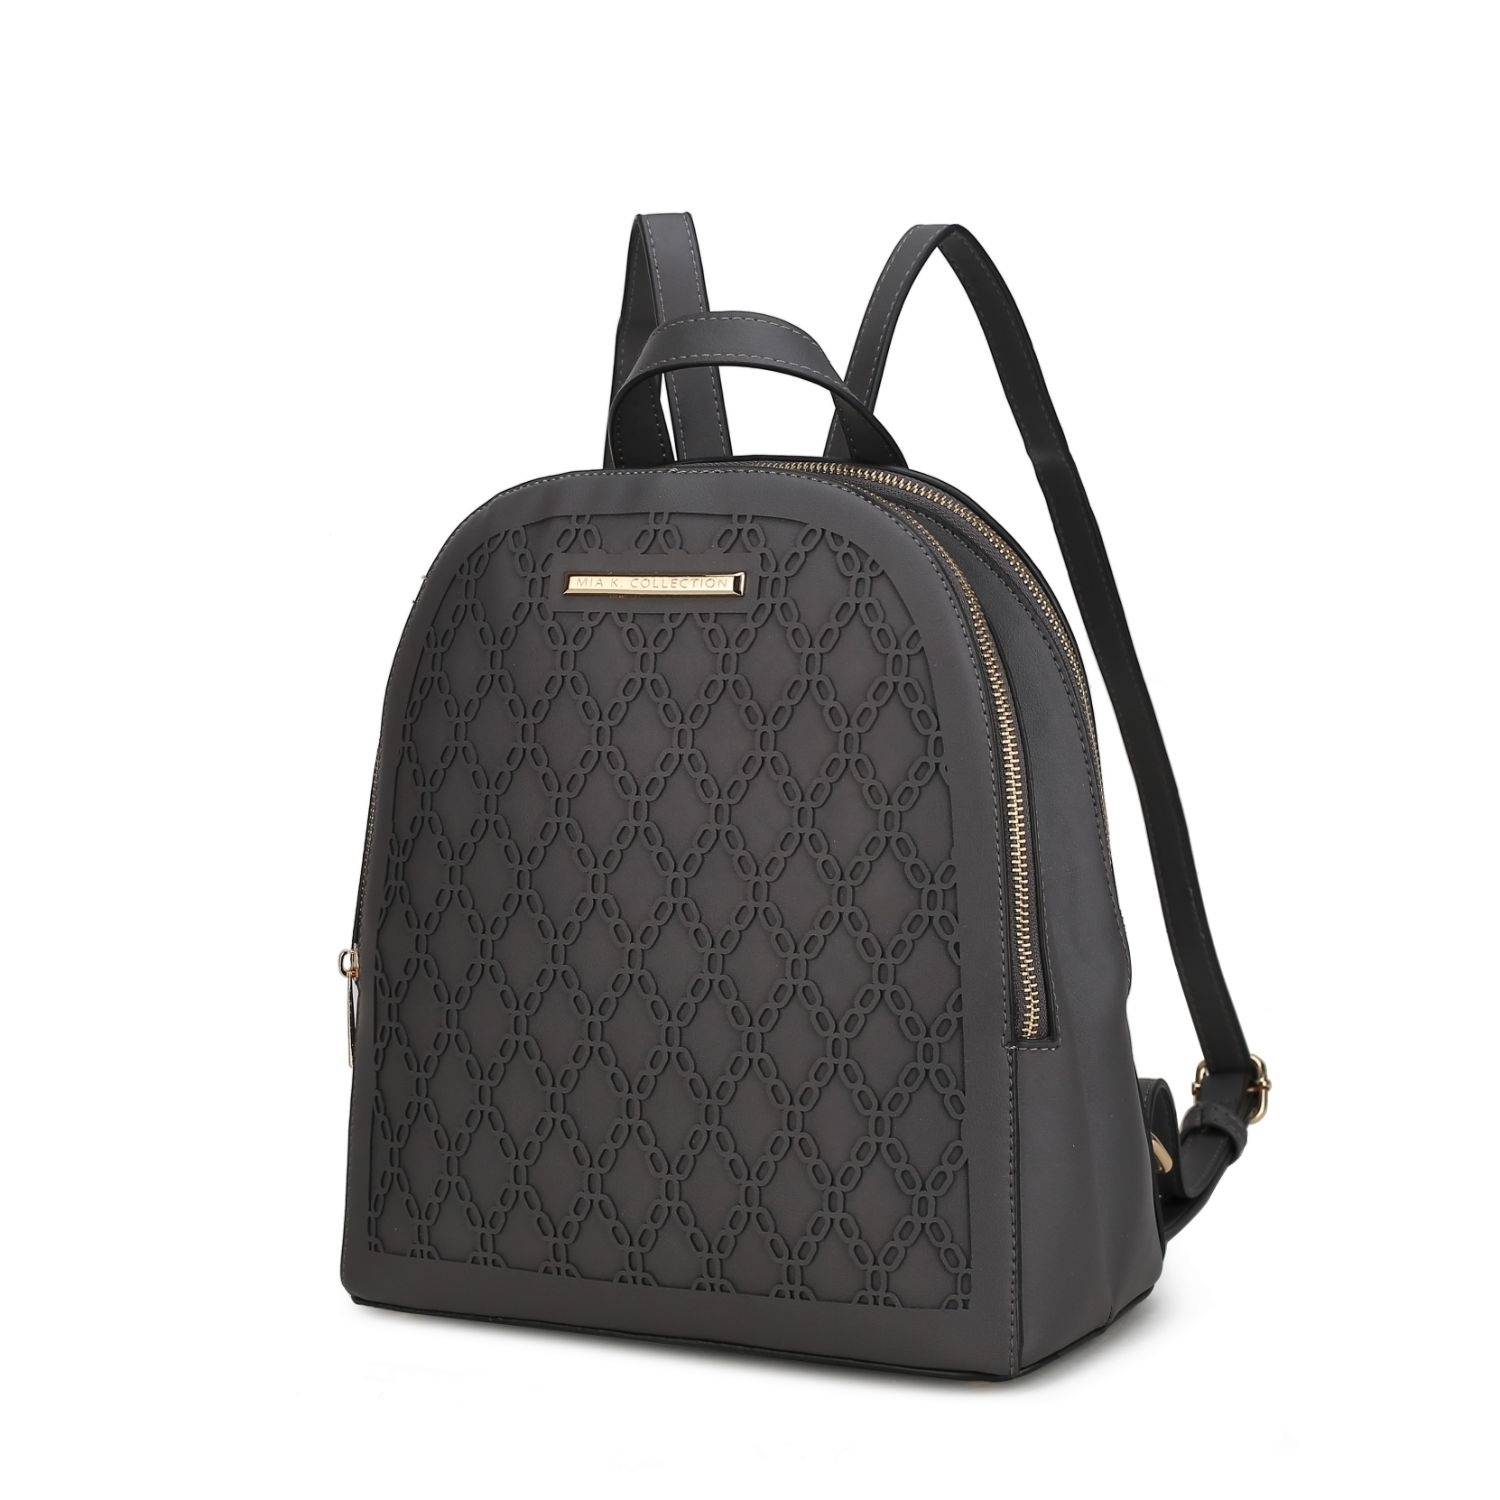 MKF Collection Sloane Vegan Leather Multi Compartment Backpack By Mia K. - Charcoal